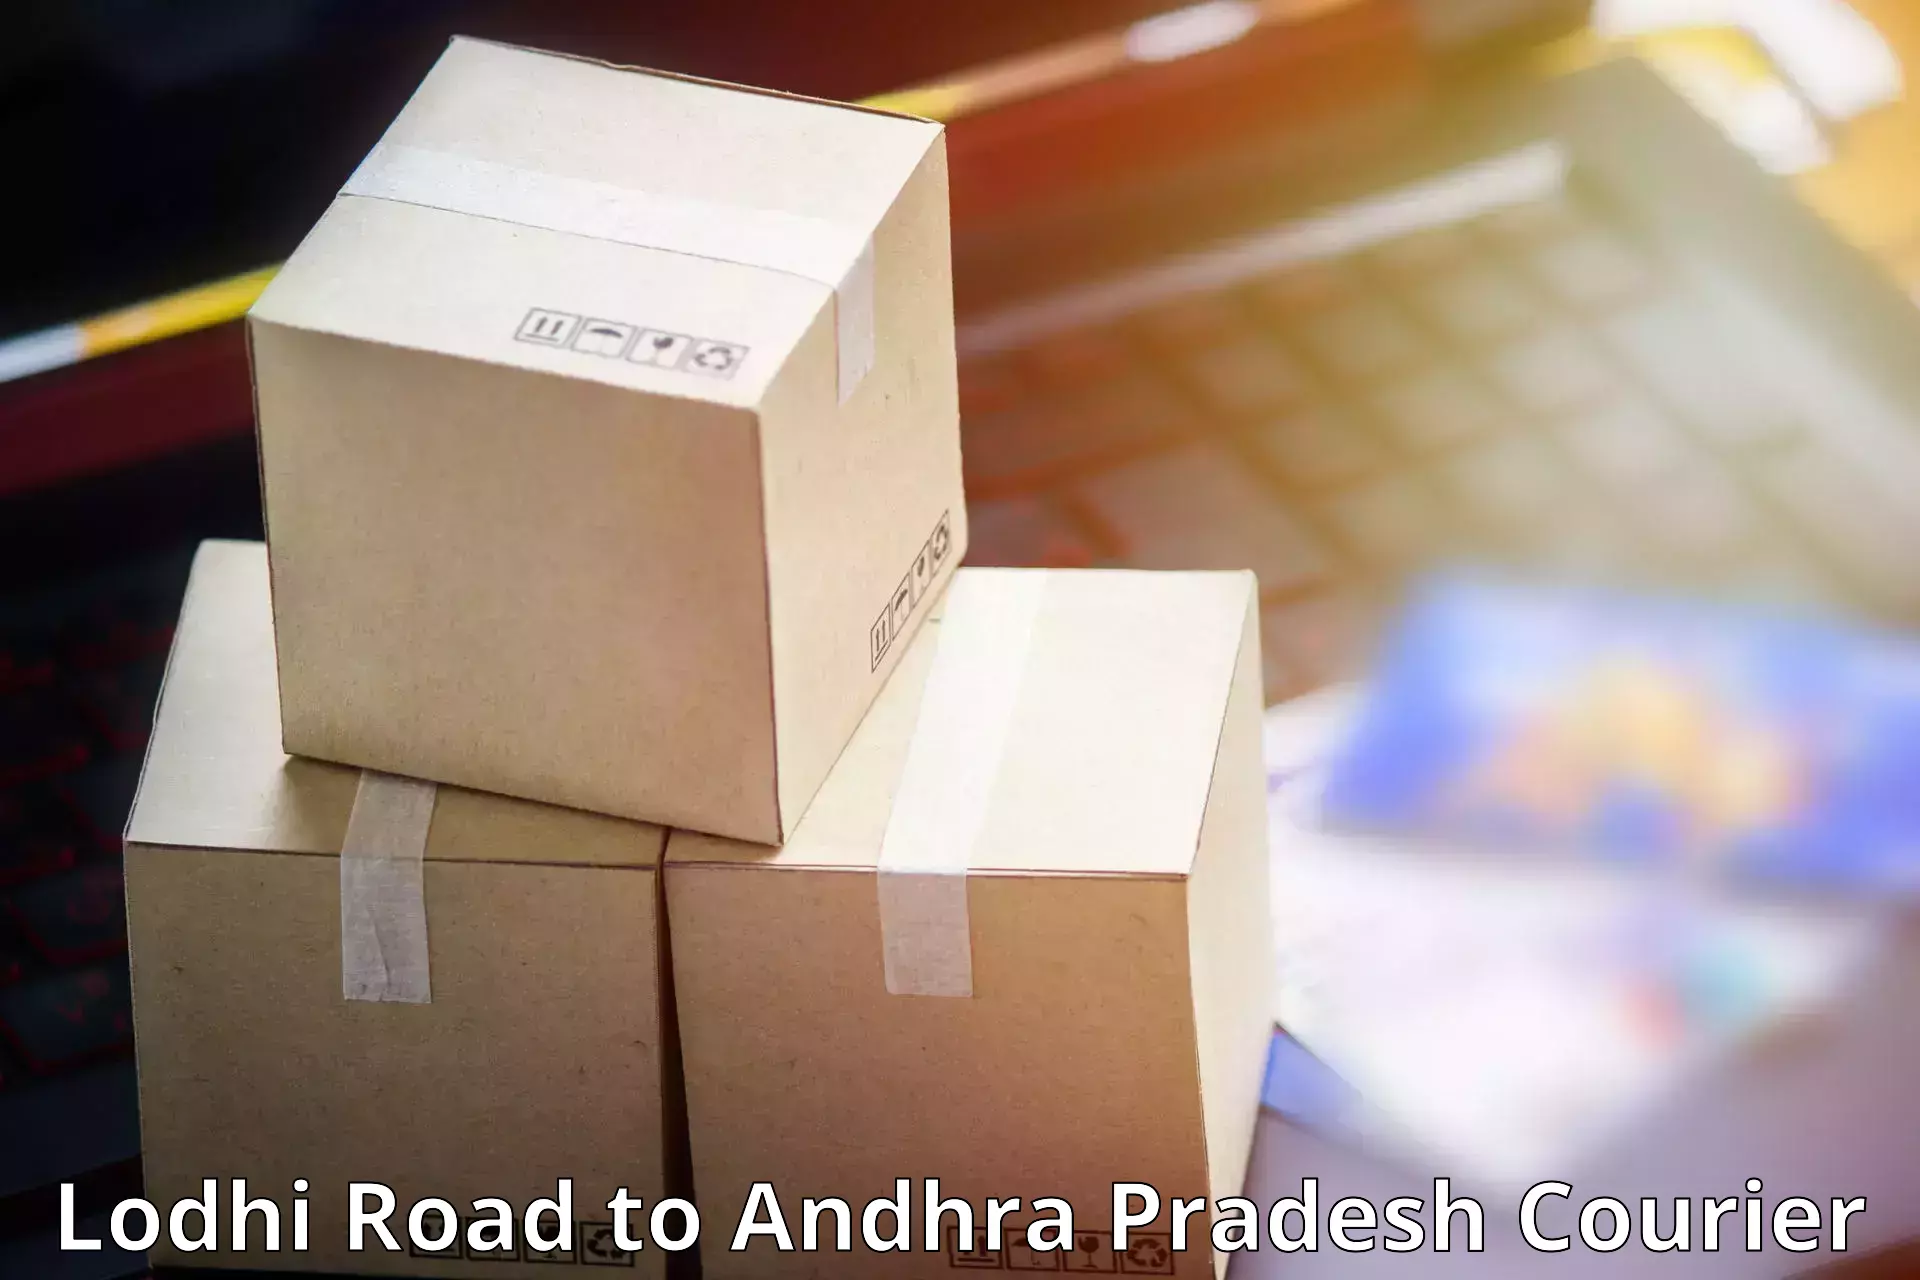 Specialized courier services Lodhi Road to Naupada